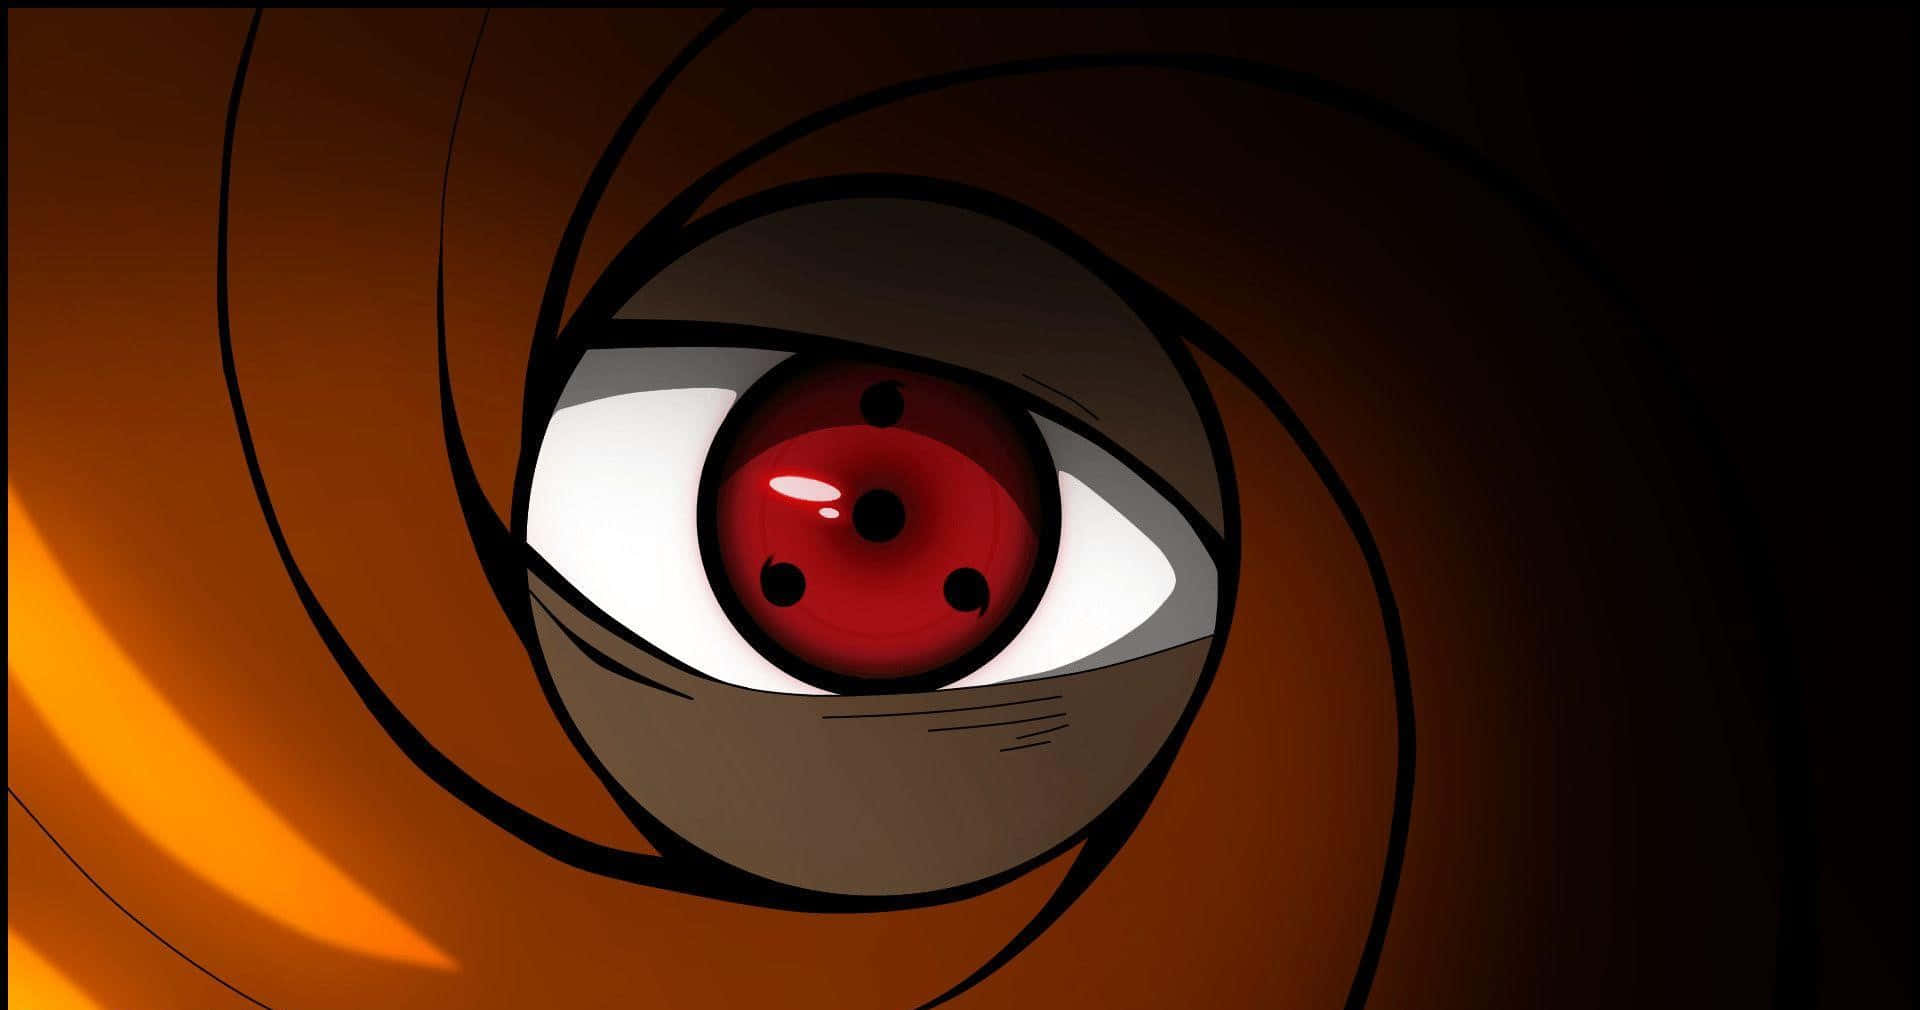 A Cartoon Eye With Red Eyes Wallpaper